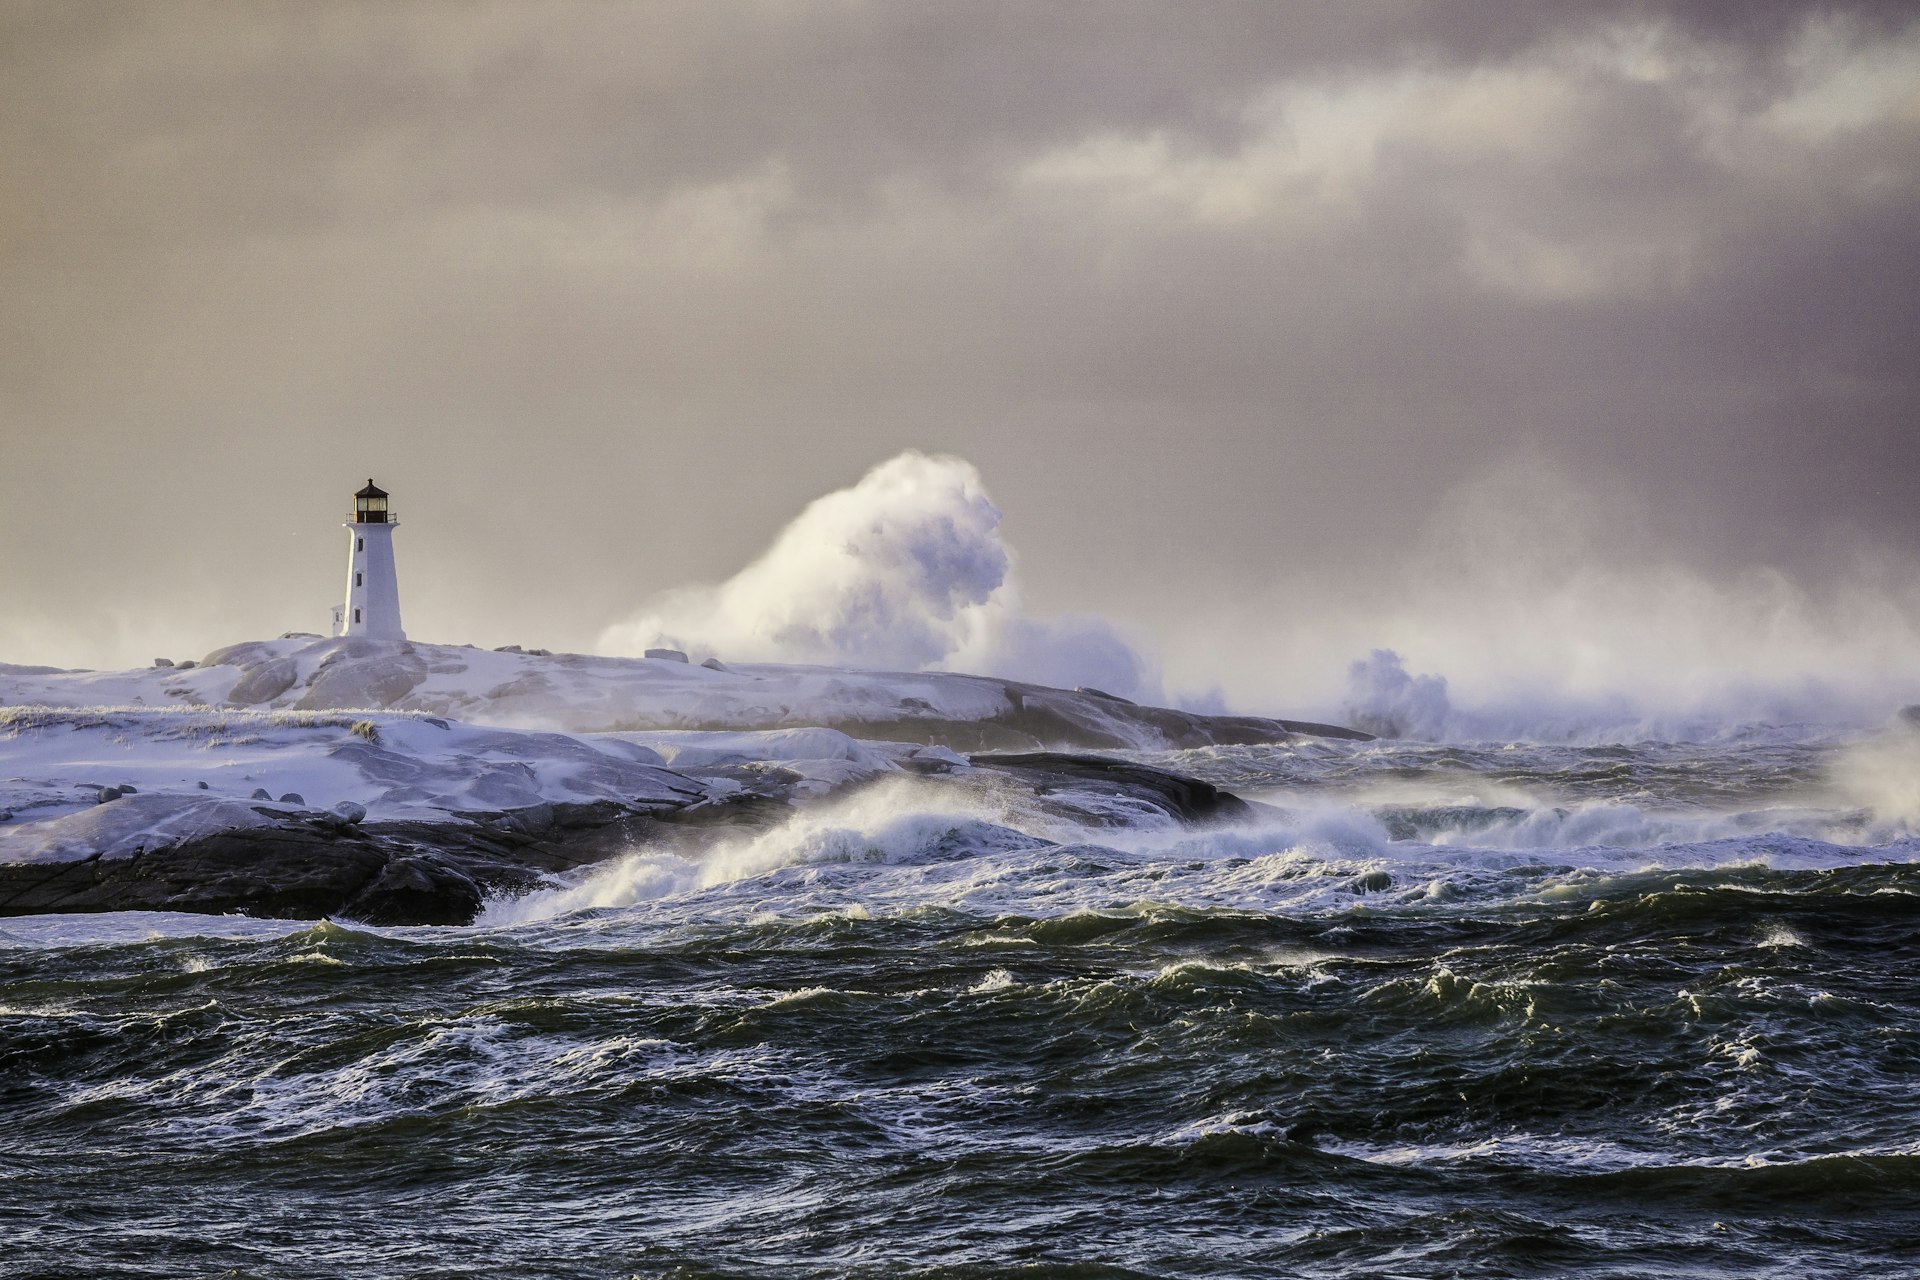 Lighthouse at Peggy's Cove being buffeted by winter storm ocean waves.